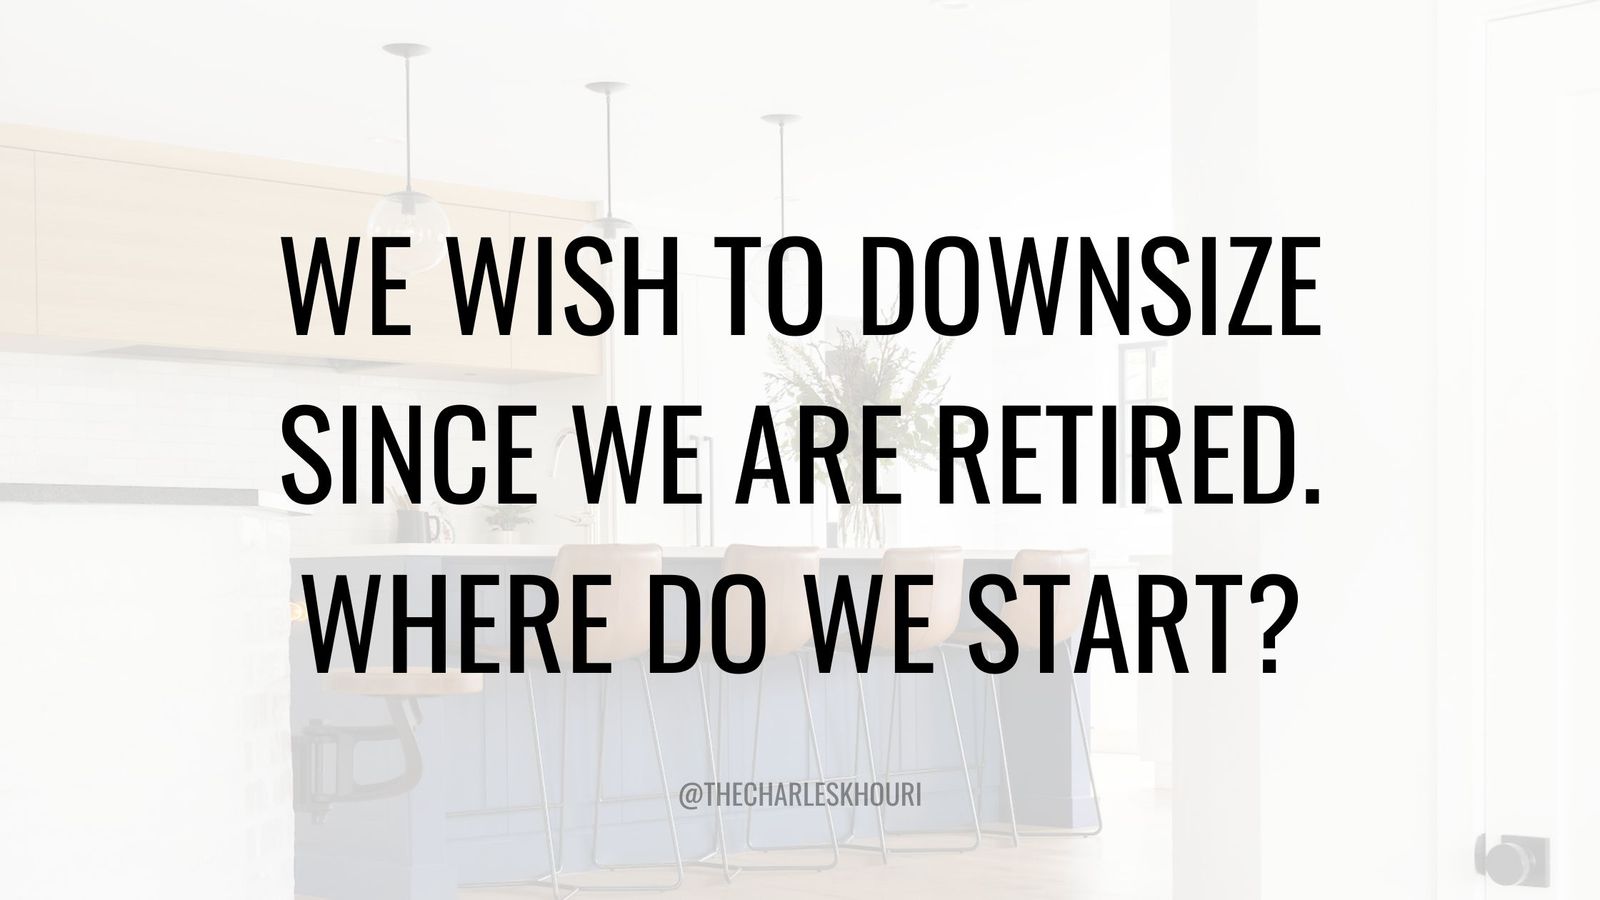 We wish to downsize since we are retired. Where do we start?